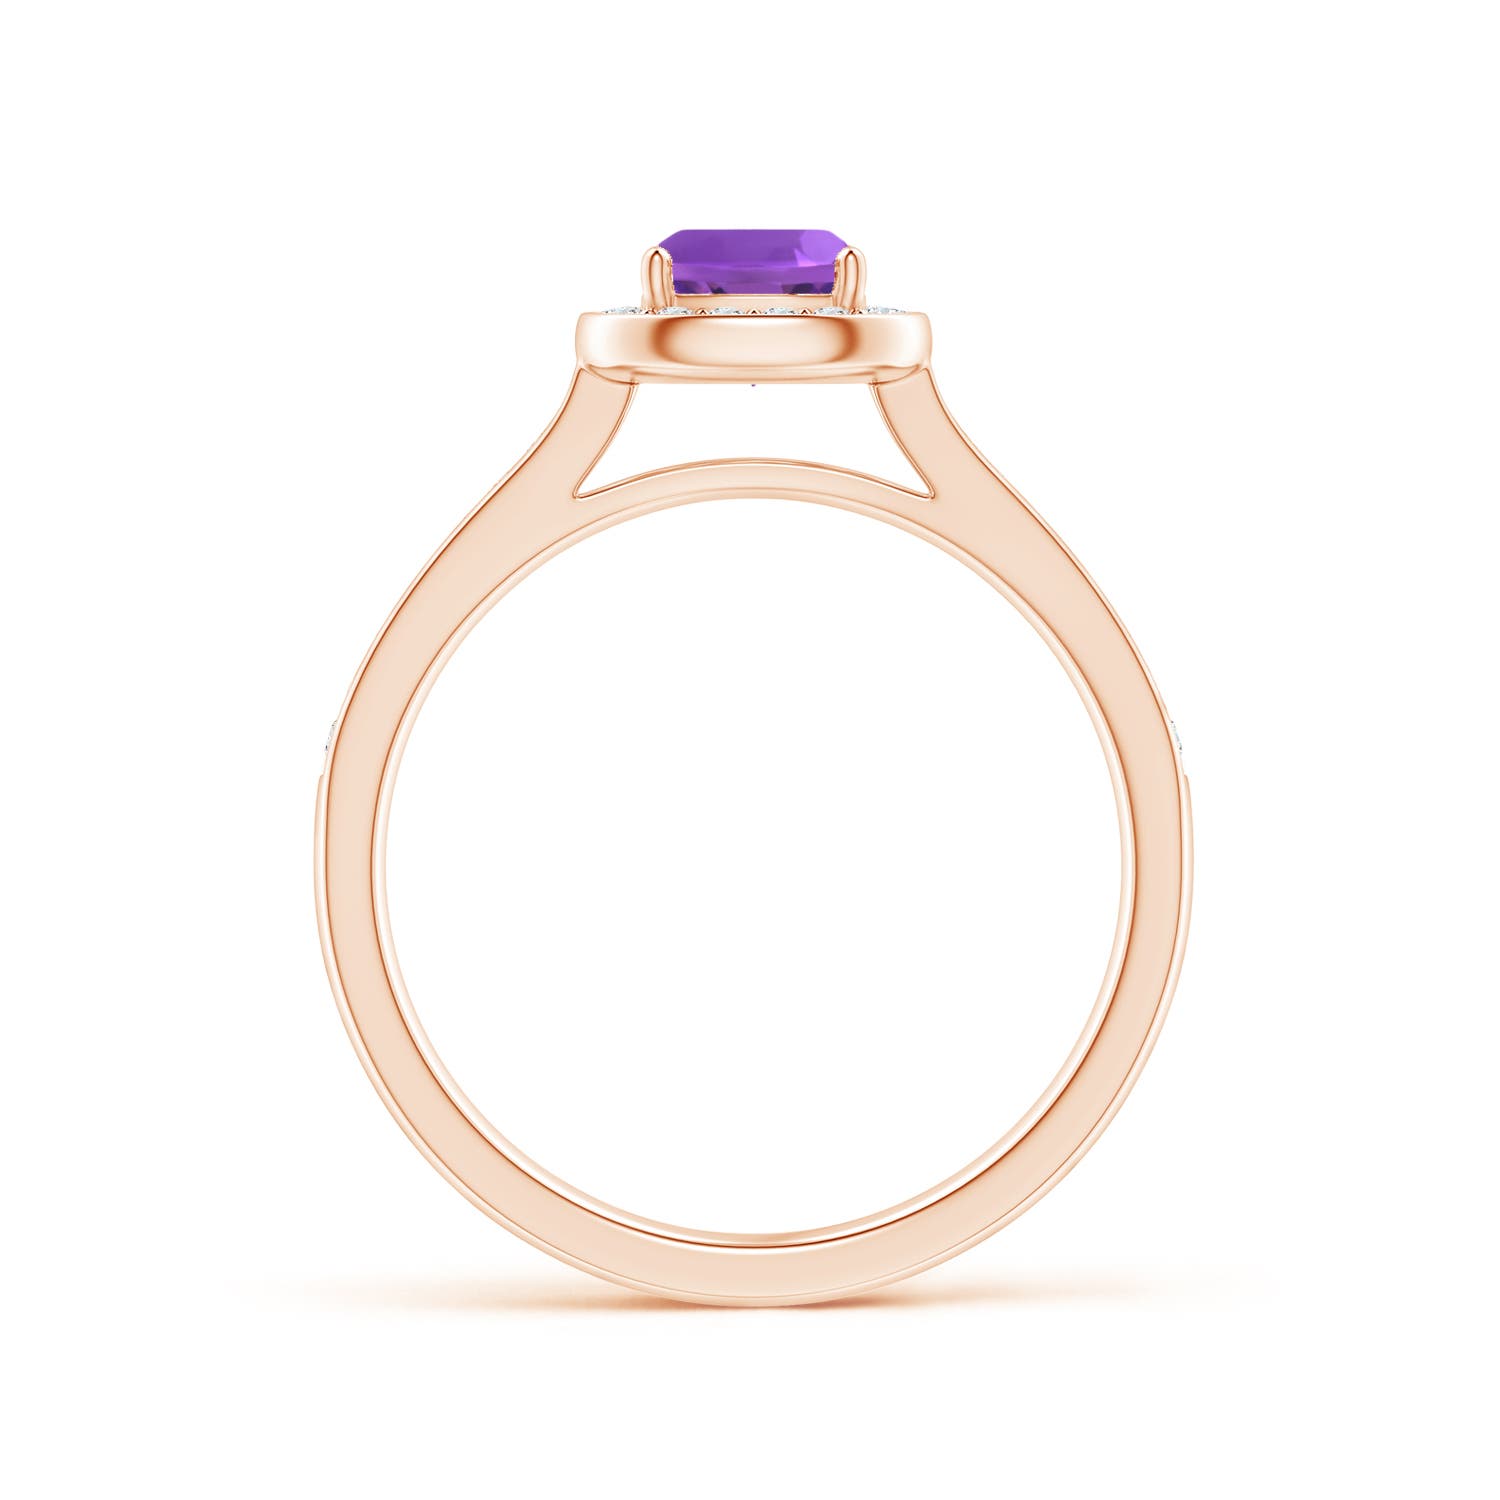 AAA - Amethyst / 0.81 CT / 14 KT Rose Gold